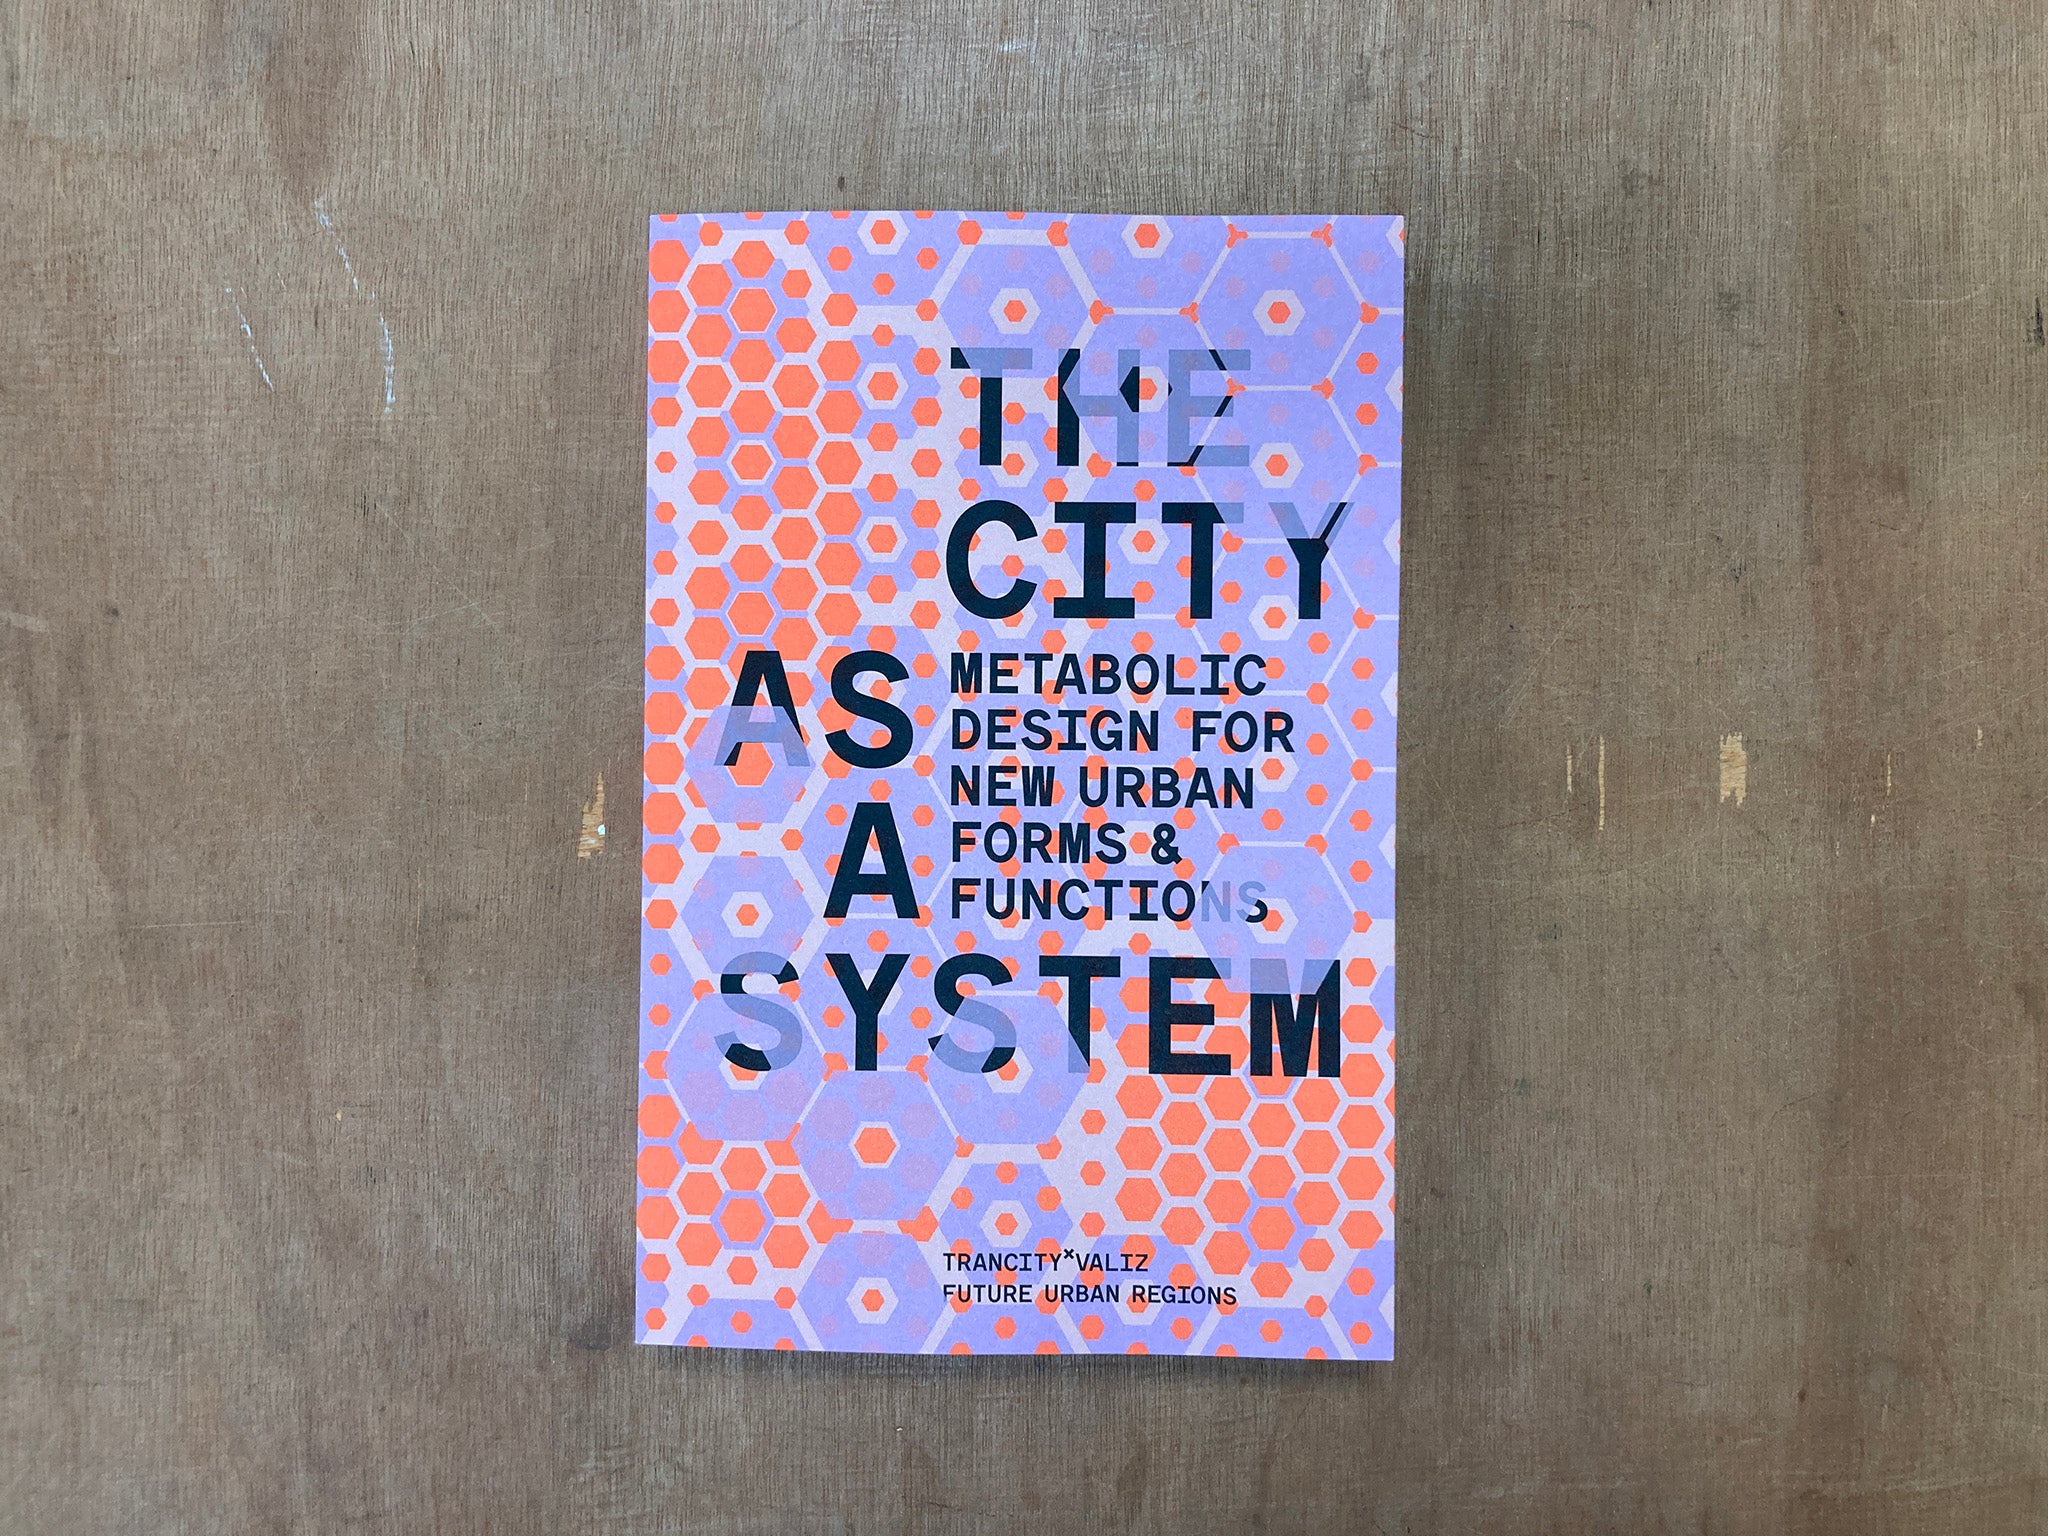 THE CITY AS A SYSTEM: METABOLIC DESIGN FOR NEW URBAN FORMS AND FUNCTIONS